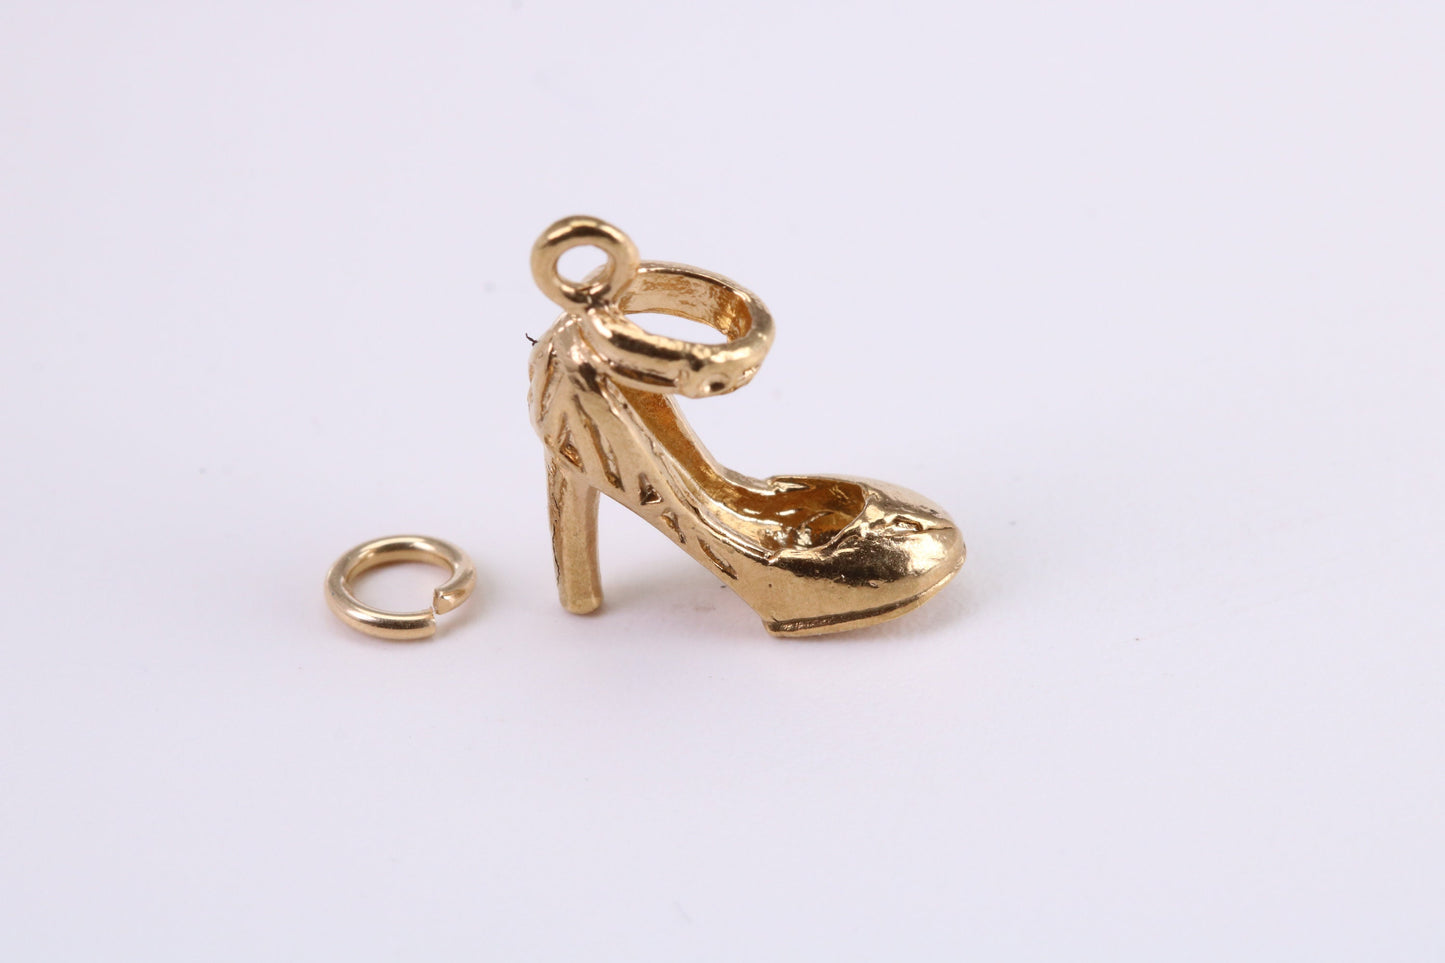 Stiletto Charm, Traditional Charm, Made from Solid Yellow Gold, British Hallmarked, Complete with Attachment Link